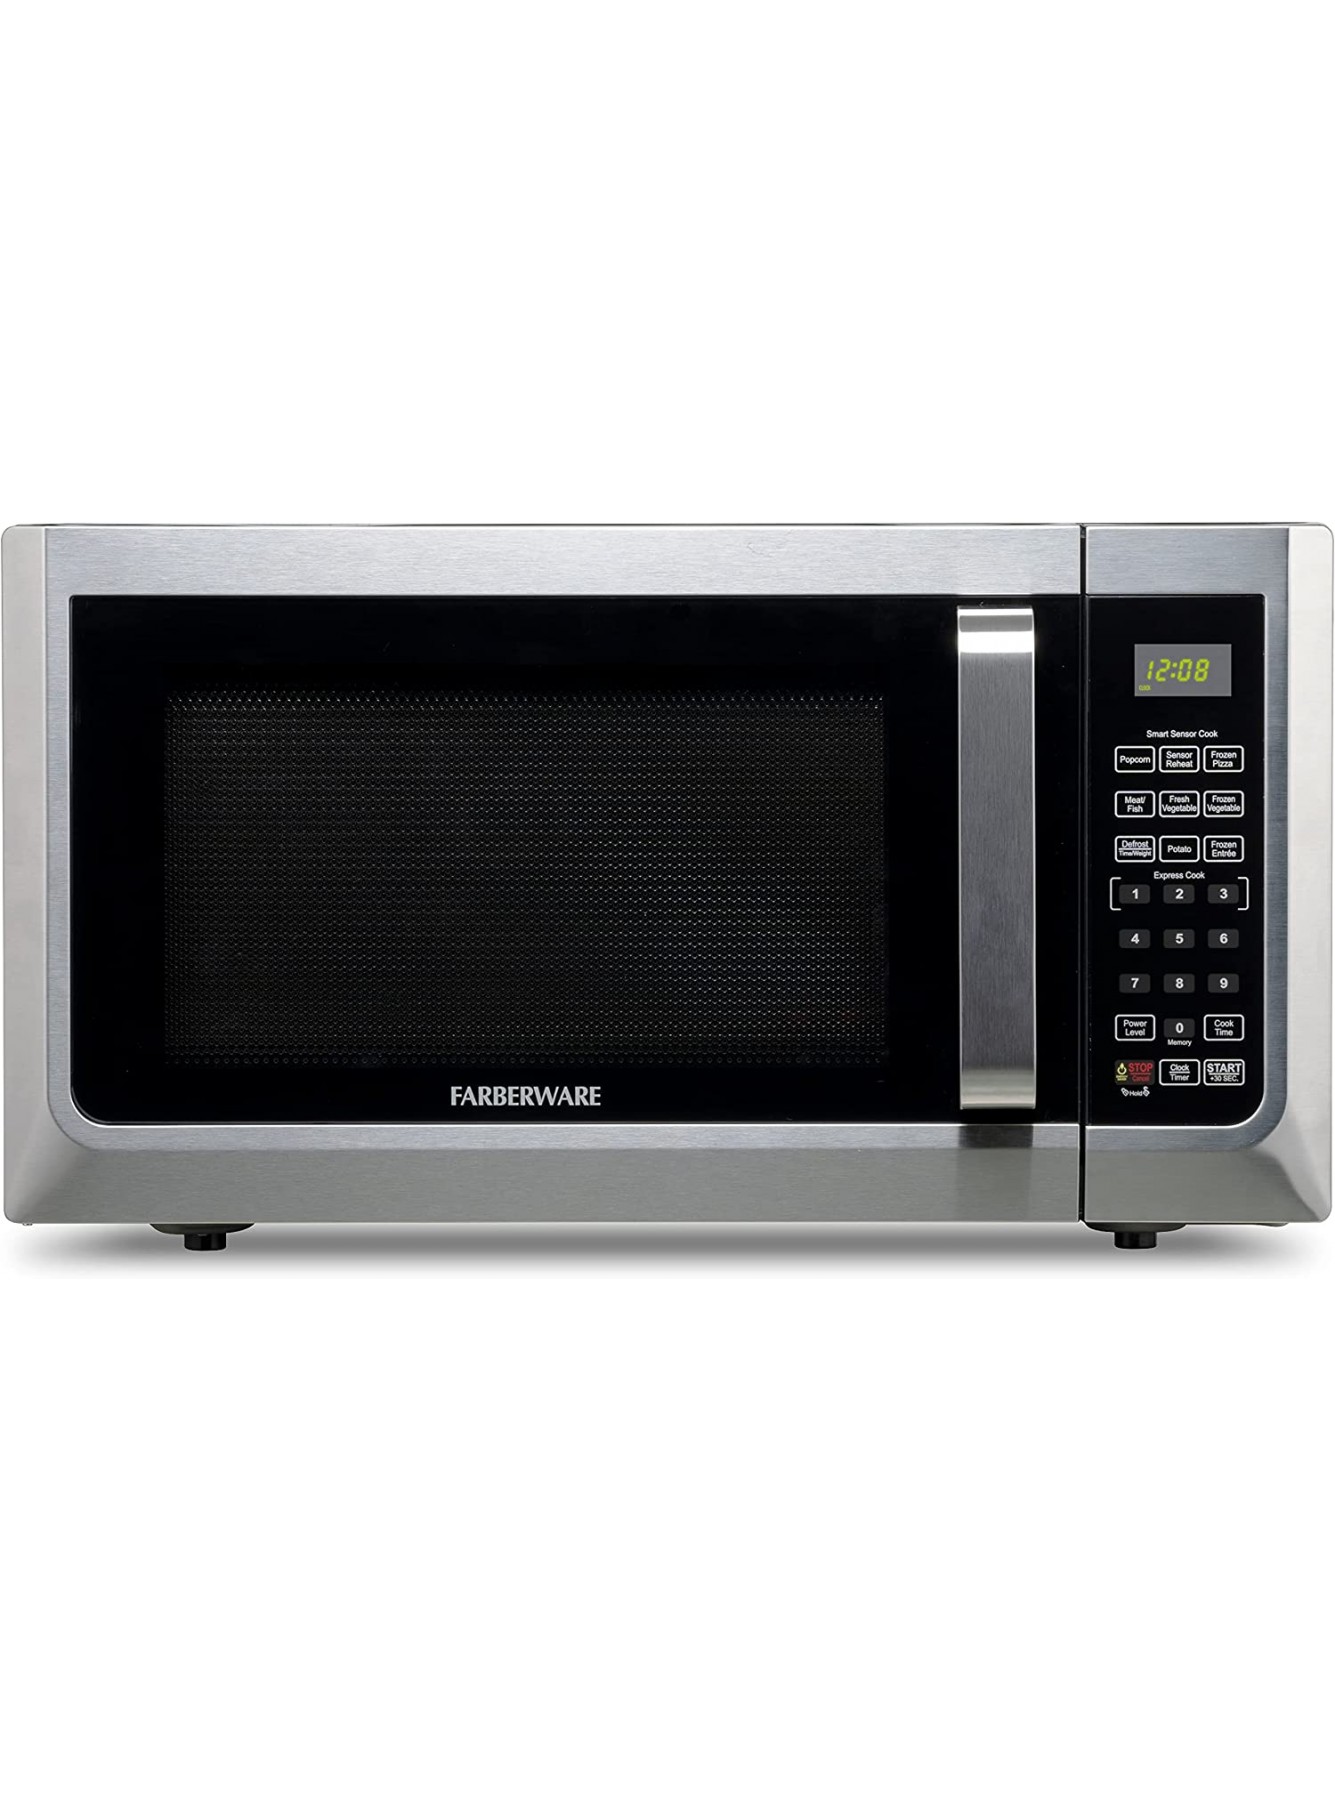 Farberware FMG13SS Countertop 1.3 Cu. Ft. 1100 Watt Microwave Oven with Smart Sensor Cooking LED Display Stainless Stainless Steel B0B17BJ628